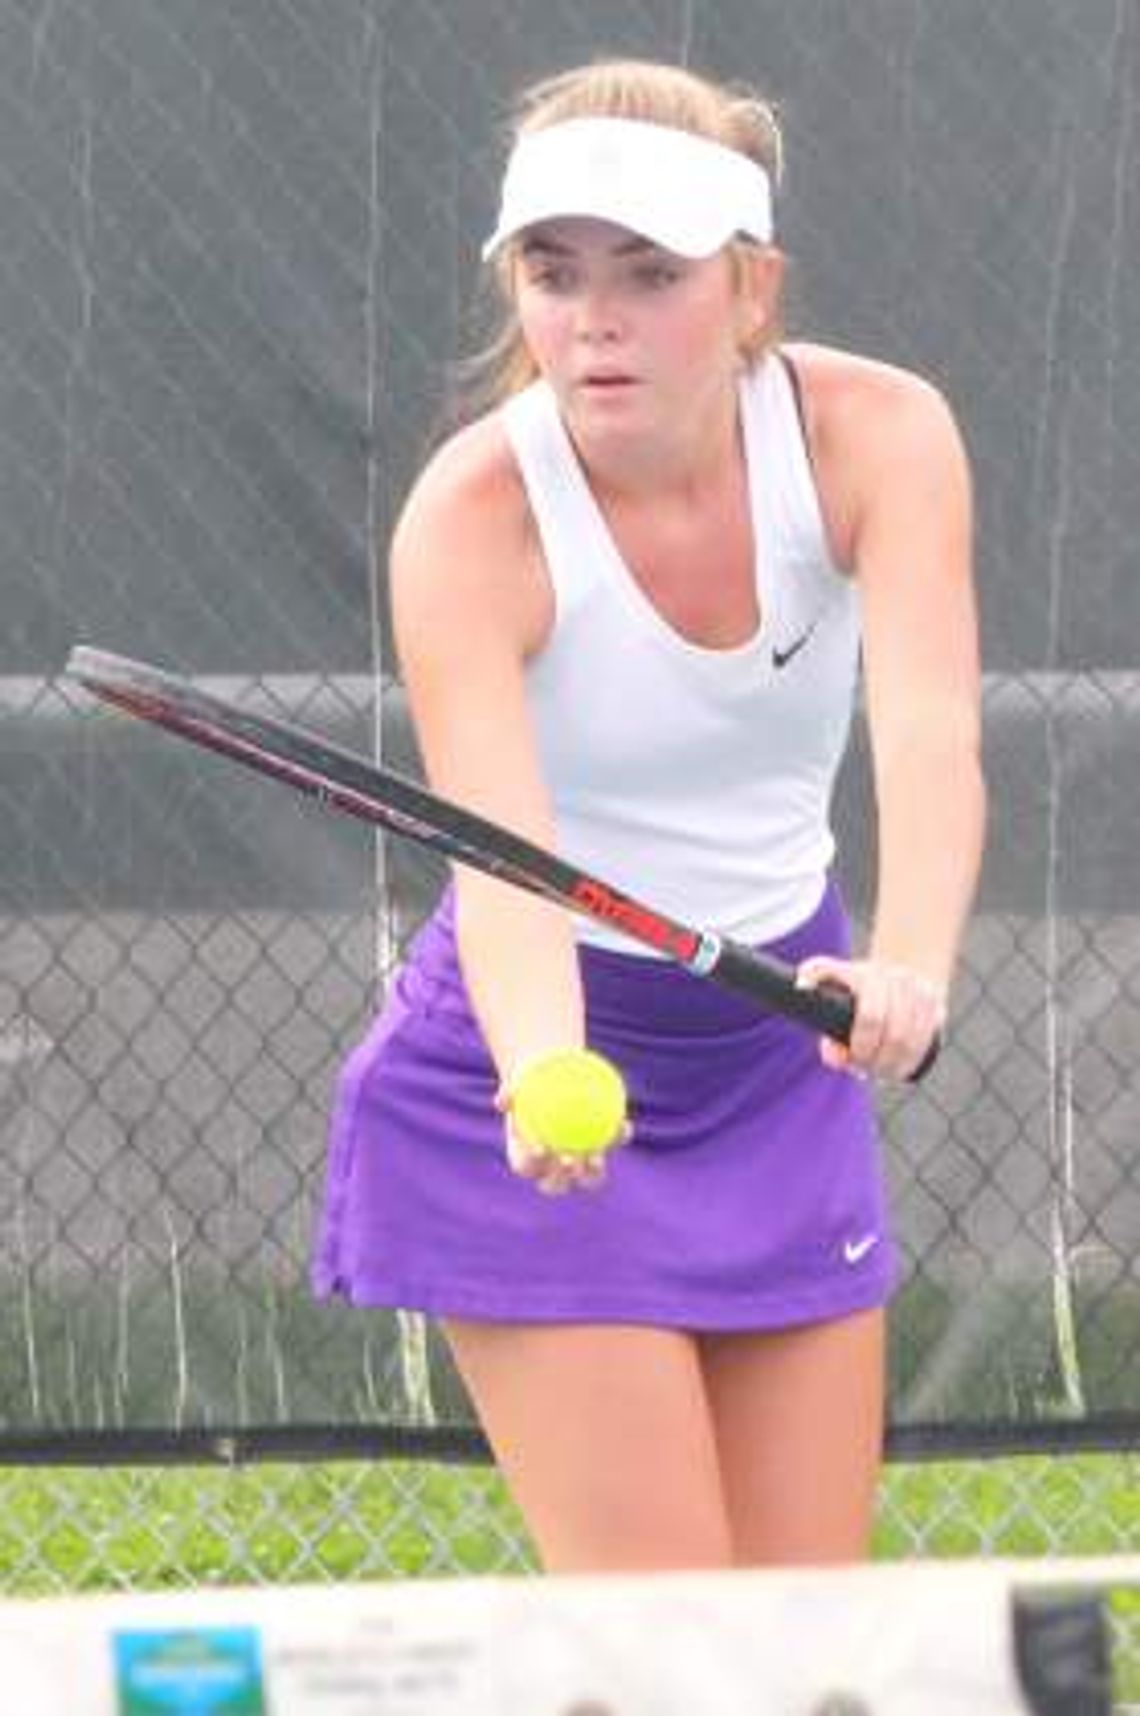 Hounds advance to state tennis tourney